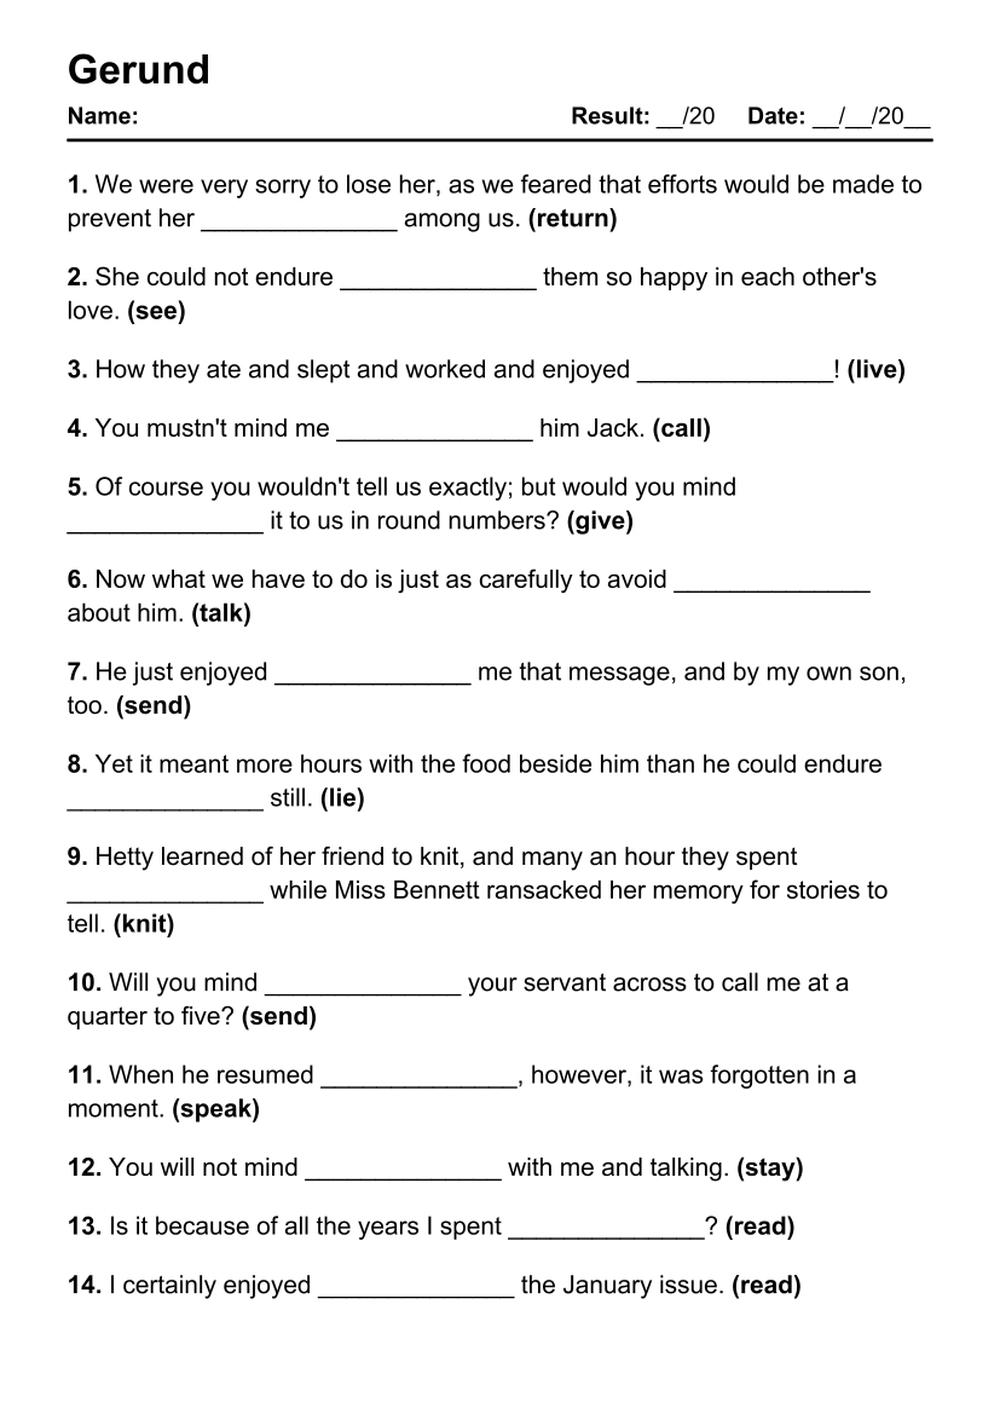 Printable Gerund Exercises - PDF Worksheet with Answers - Test 20